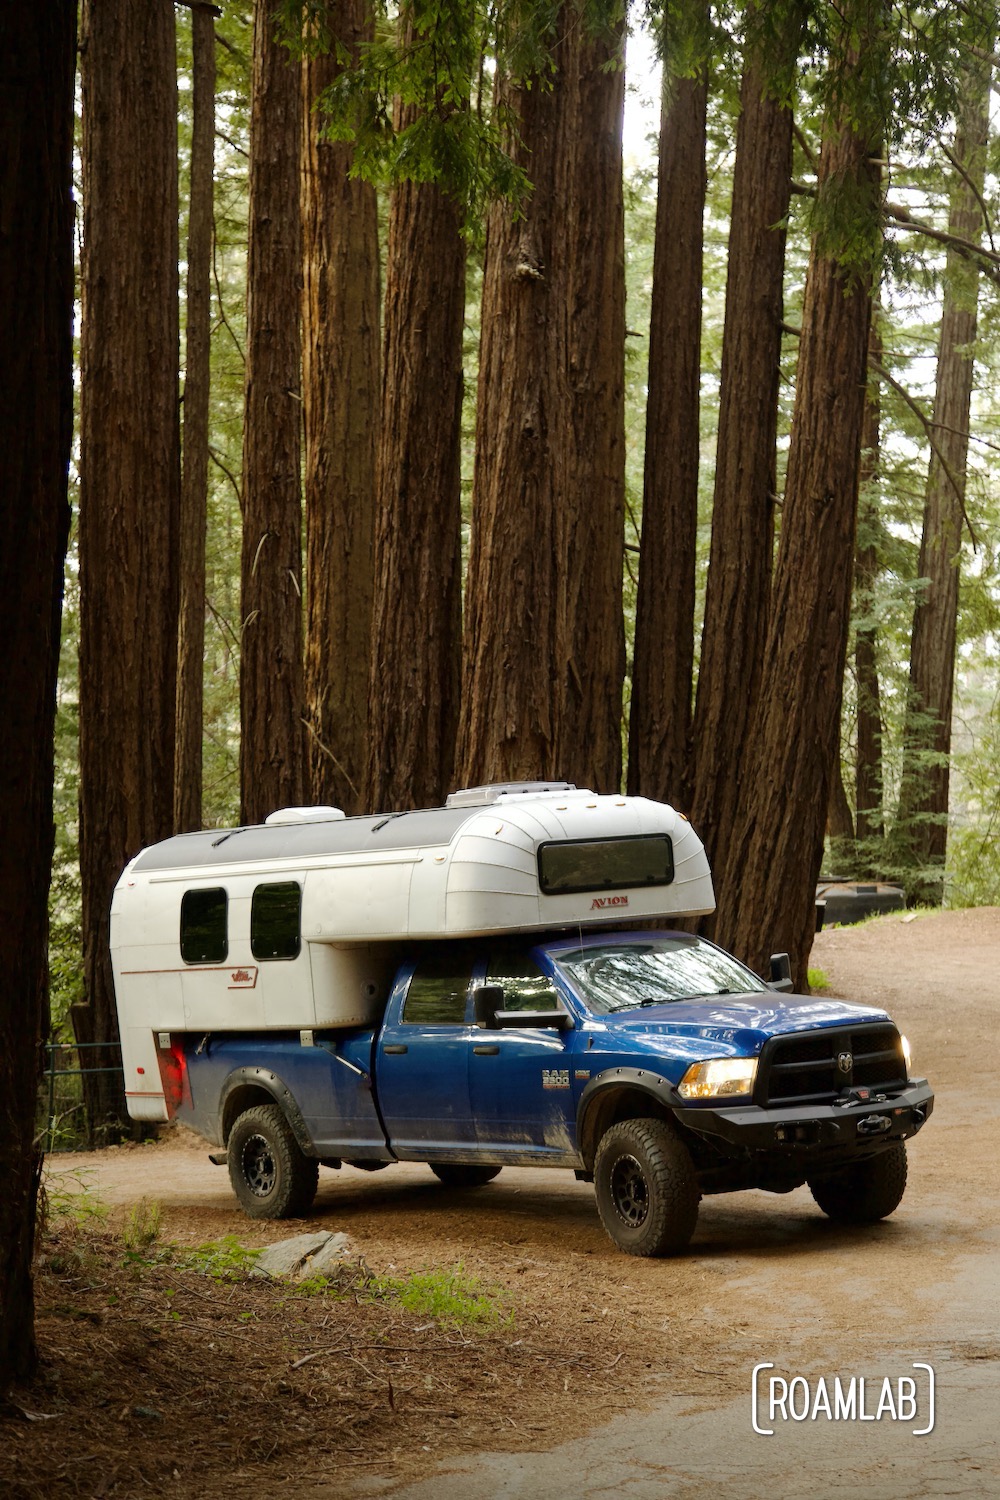 1970 Avion C11 truck camper parked among redwood trees in California